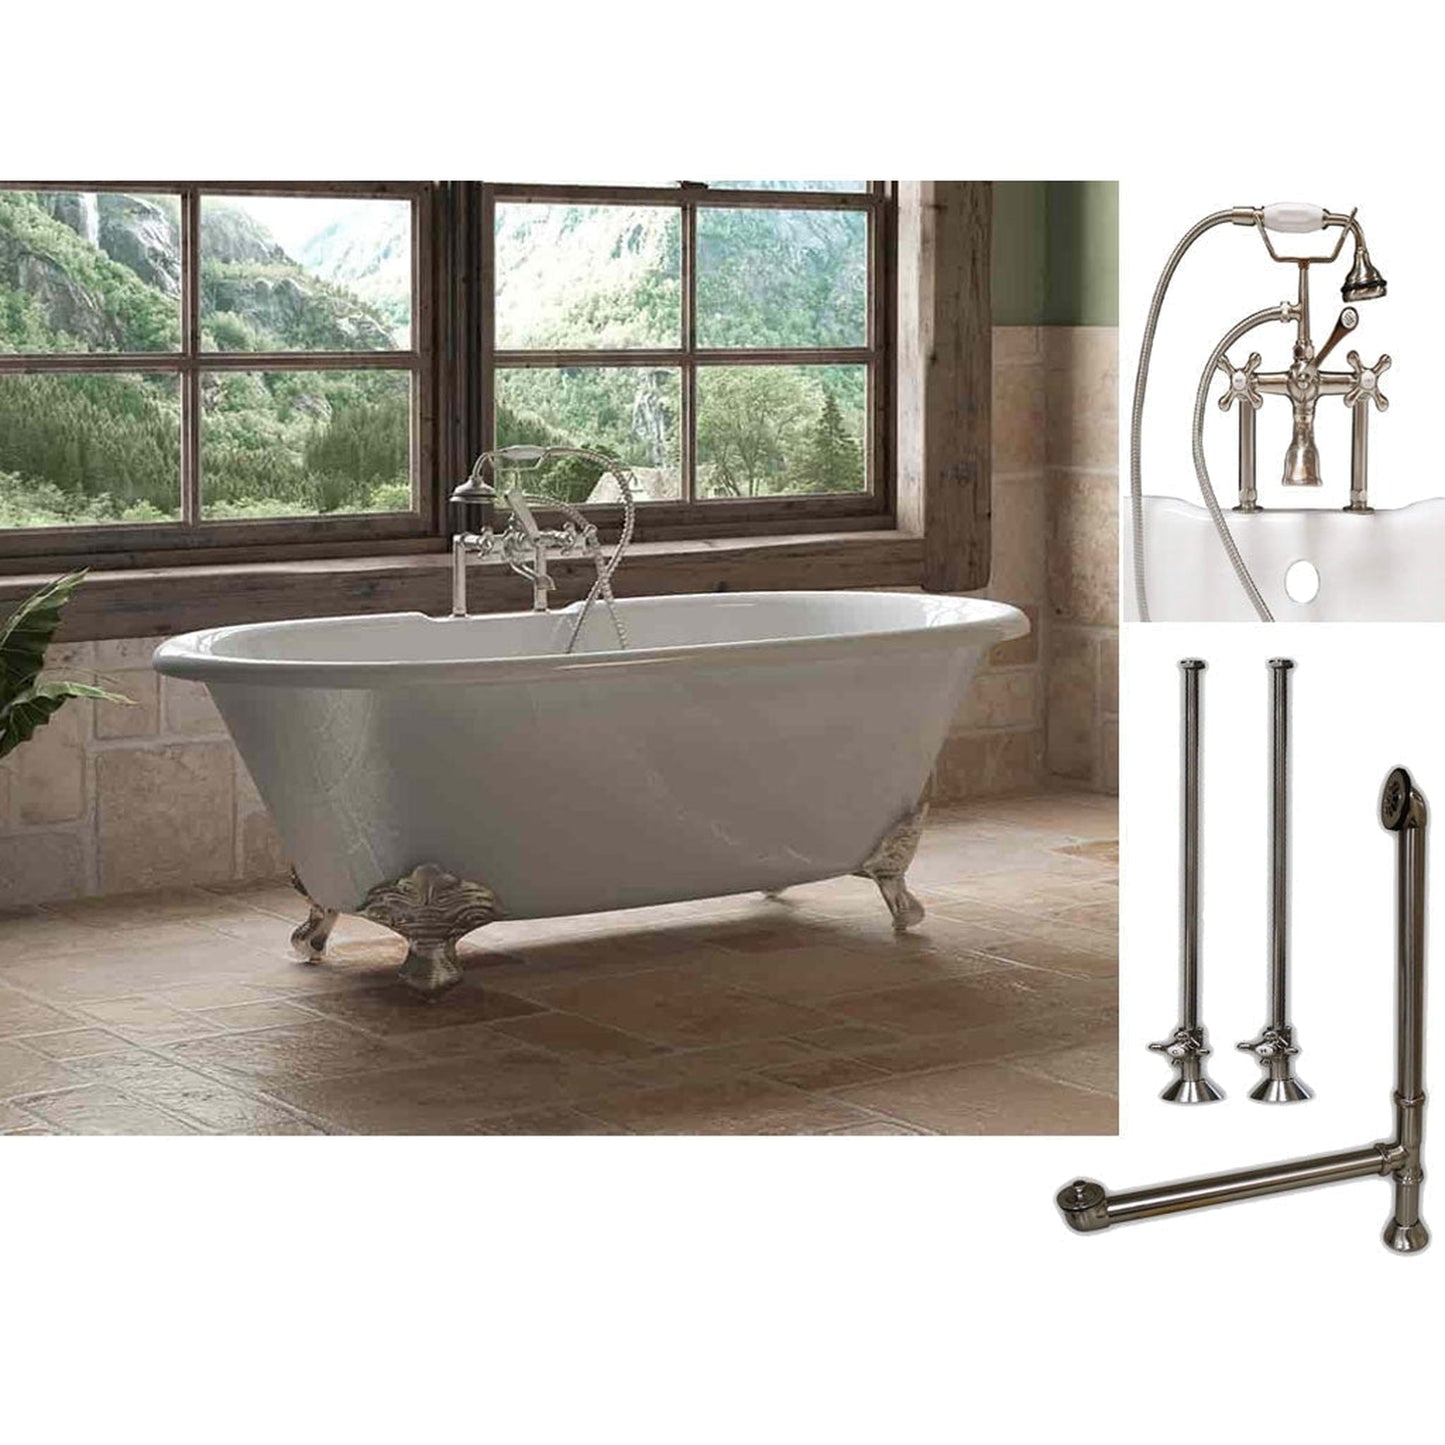 Cambridge Plumbing 67" White Cast Iron Double Ended Clawfoot Bathtub With Deck Holes And Complete Plumbing Package Including 6” Riser Deck Mount Faucet, Supply Lines, Drain And Overflow Assembly In Brushed Nickel